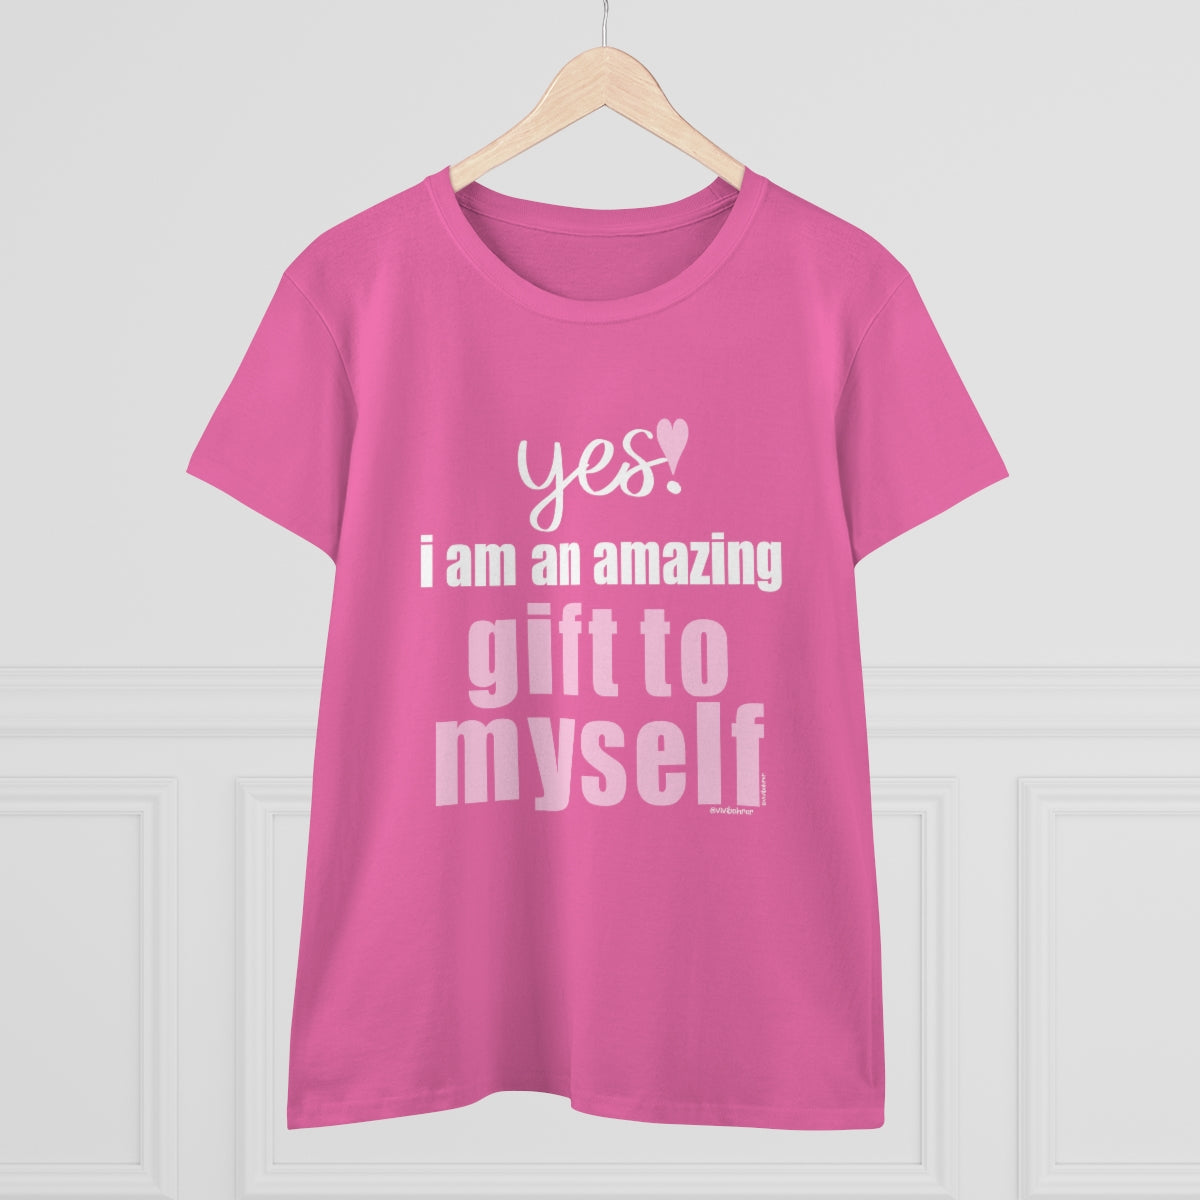 YES. I am an amazing GIFT to MYSELF .: Women's Midweight 100% Cotton Tee (Semi-fitted)